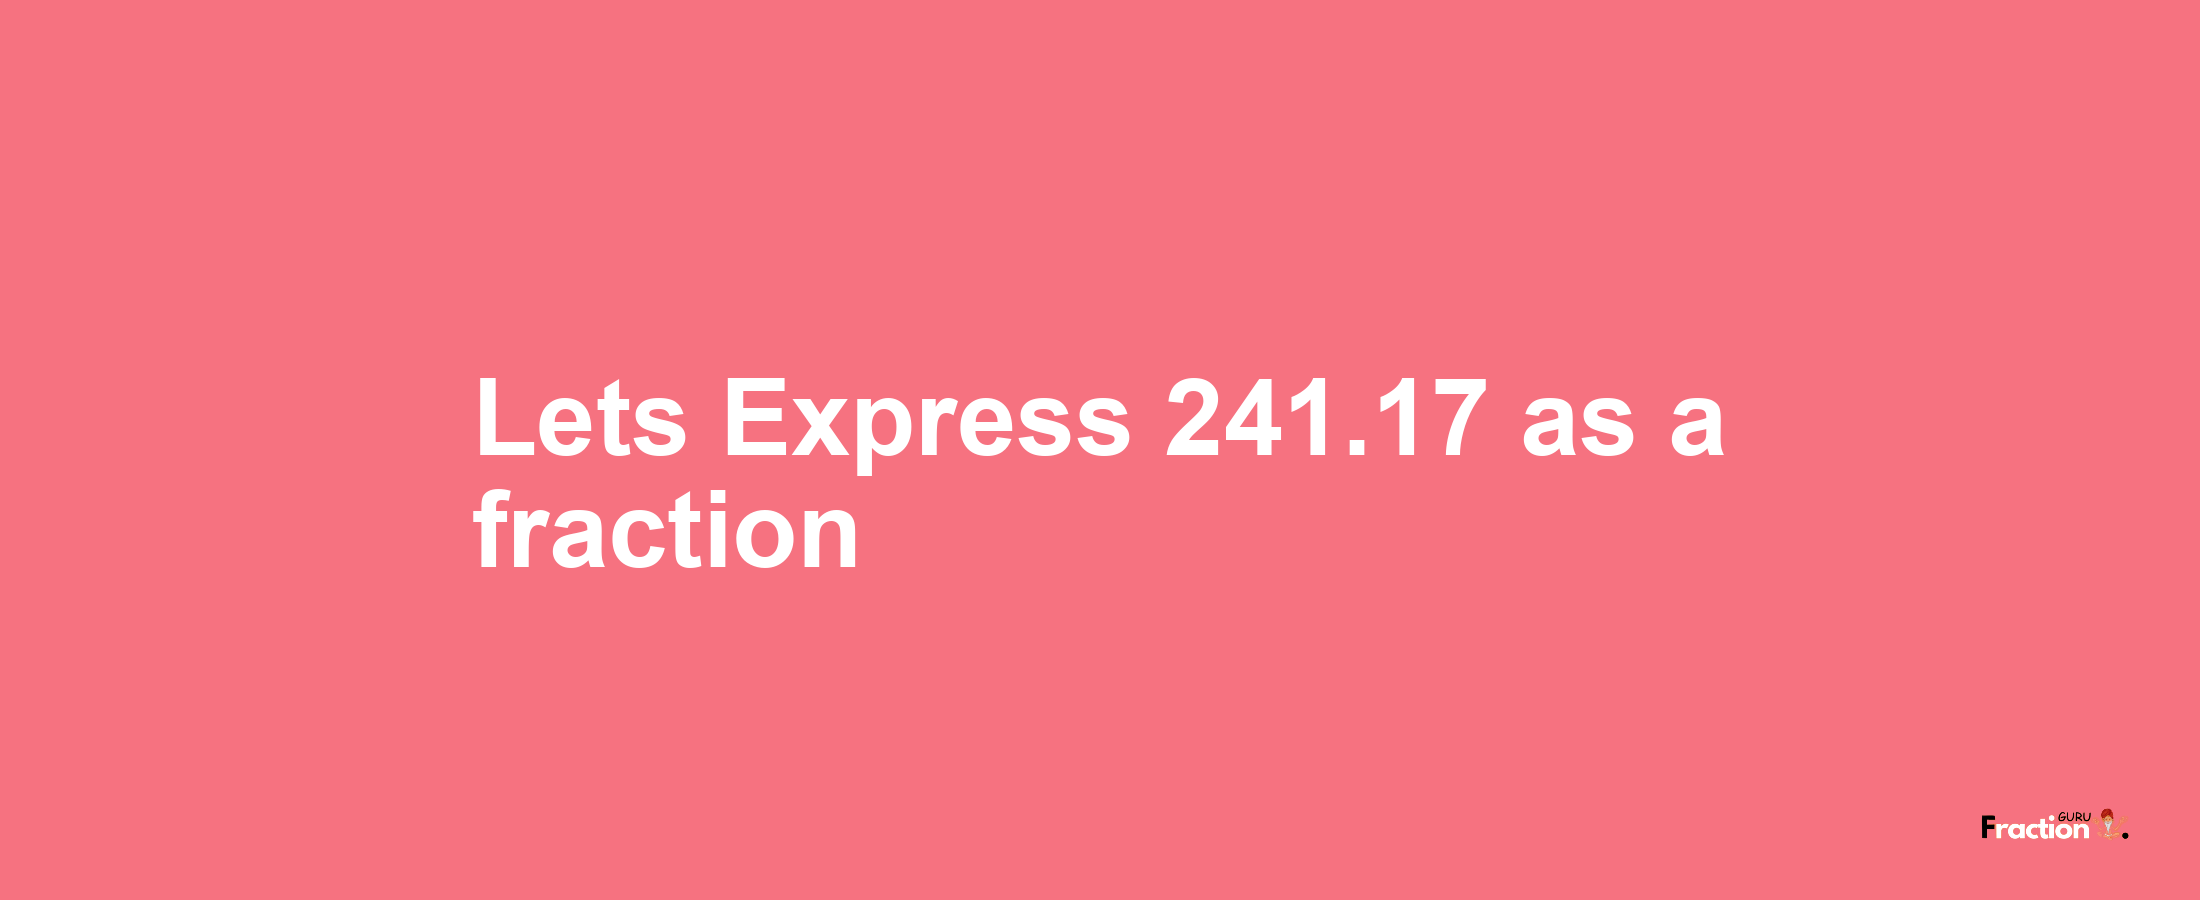 Lets Express 241.17 as afraction